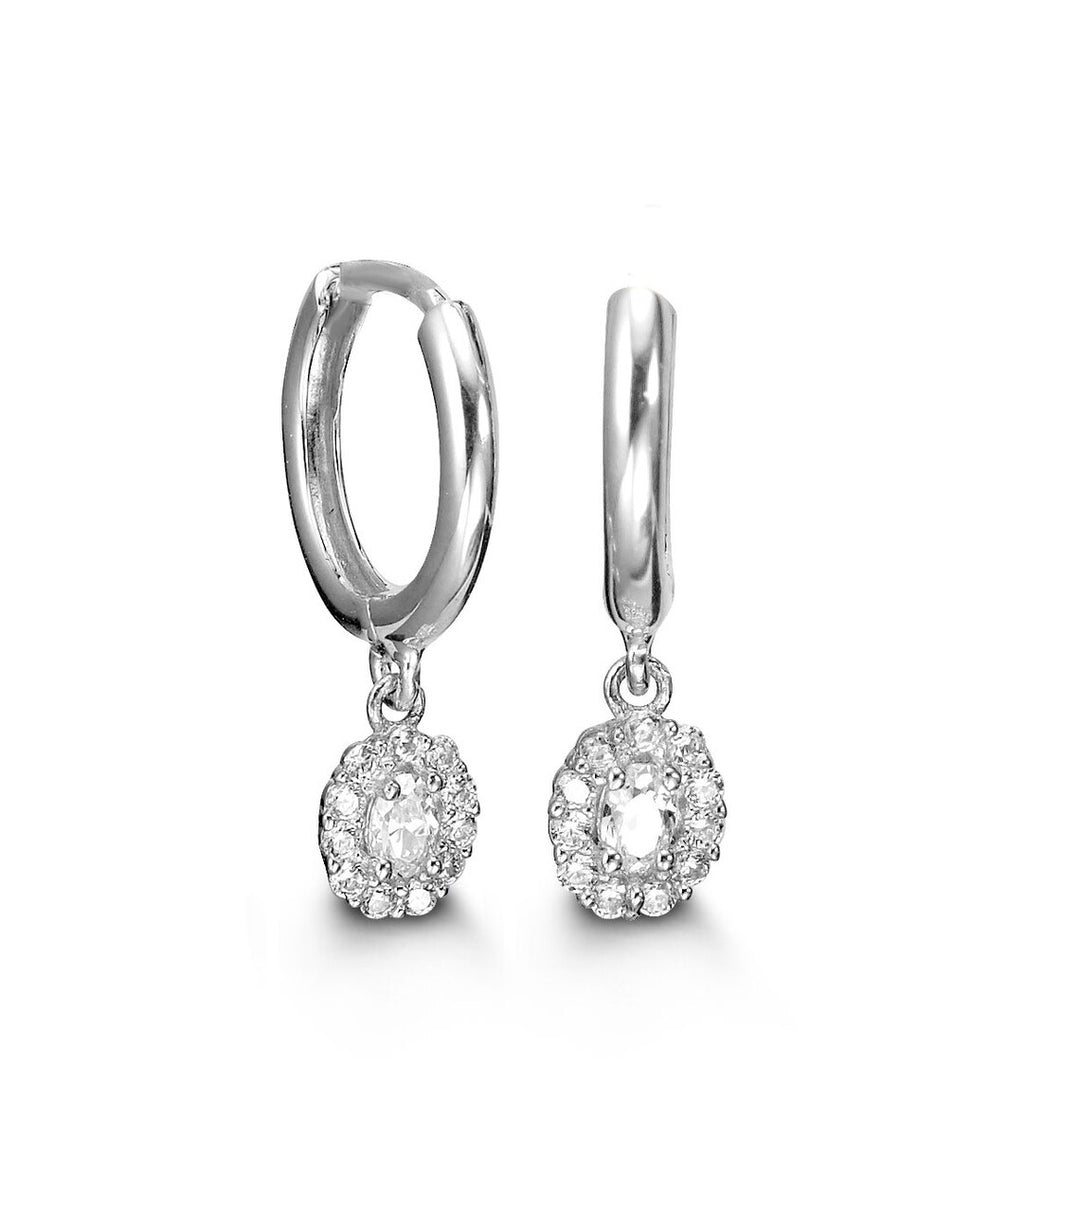 Stylish 10K white gold huggie earrings with a central cubic zirconia drop encased in a shimmering halo, ideal for elegant and sophisticated looks.